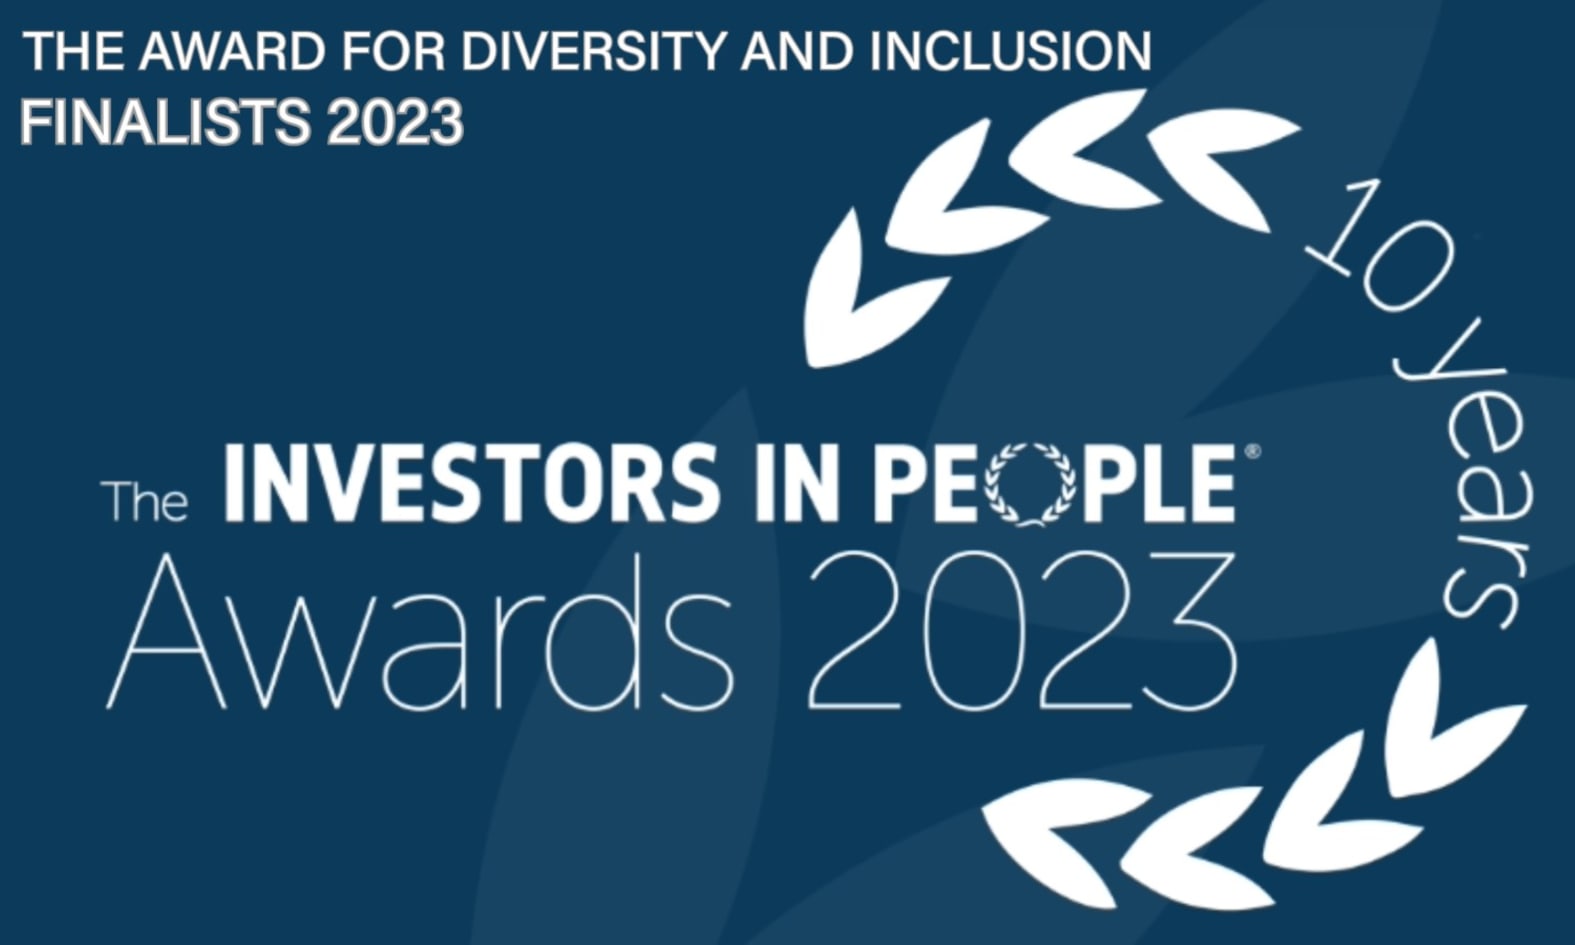 finalist in award for diversity and inclusion in Investor In People Awards 2023